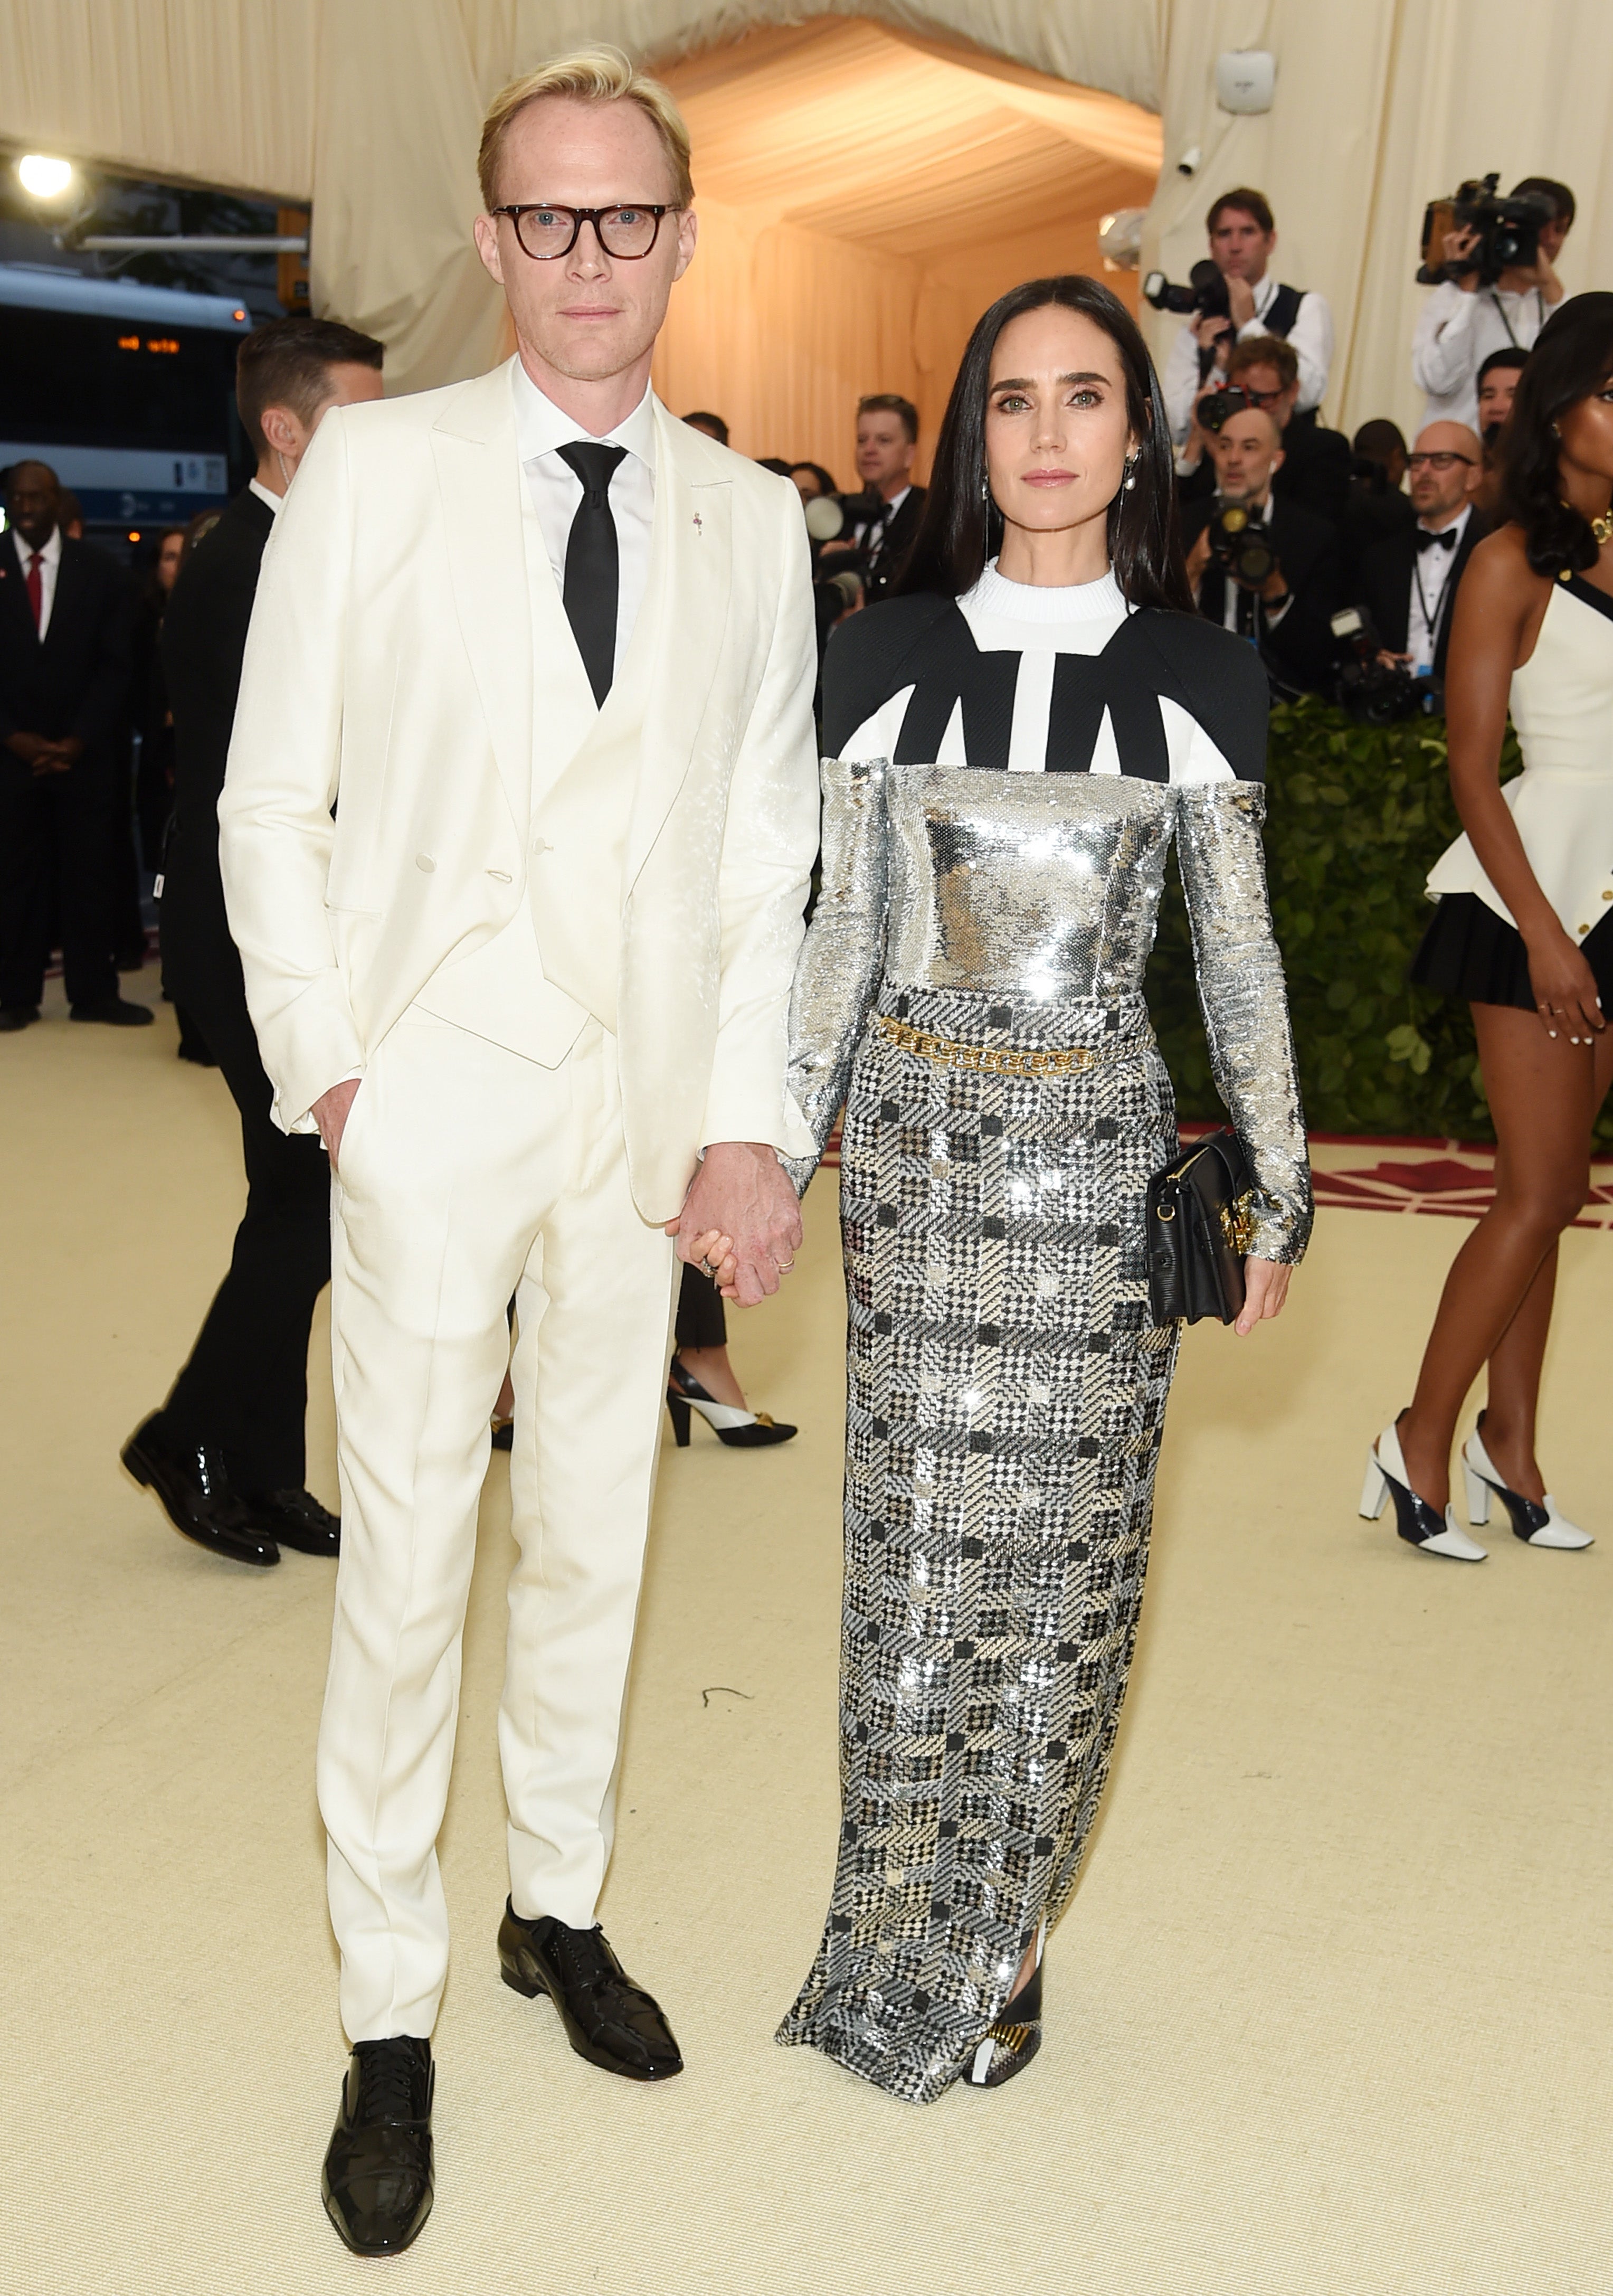 Jennifer Connelly: Paul Bettany Didn't Have Much Time for Me on Set